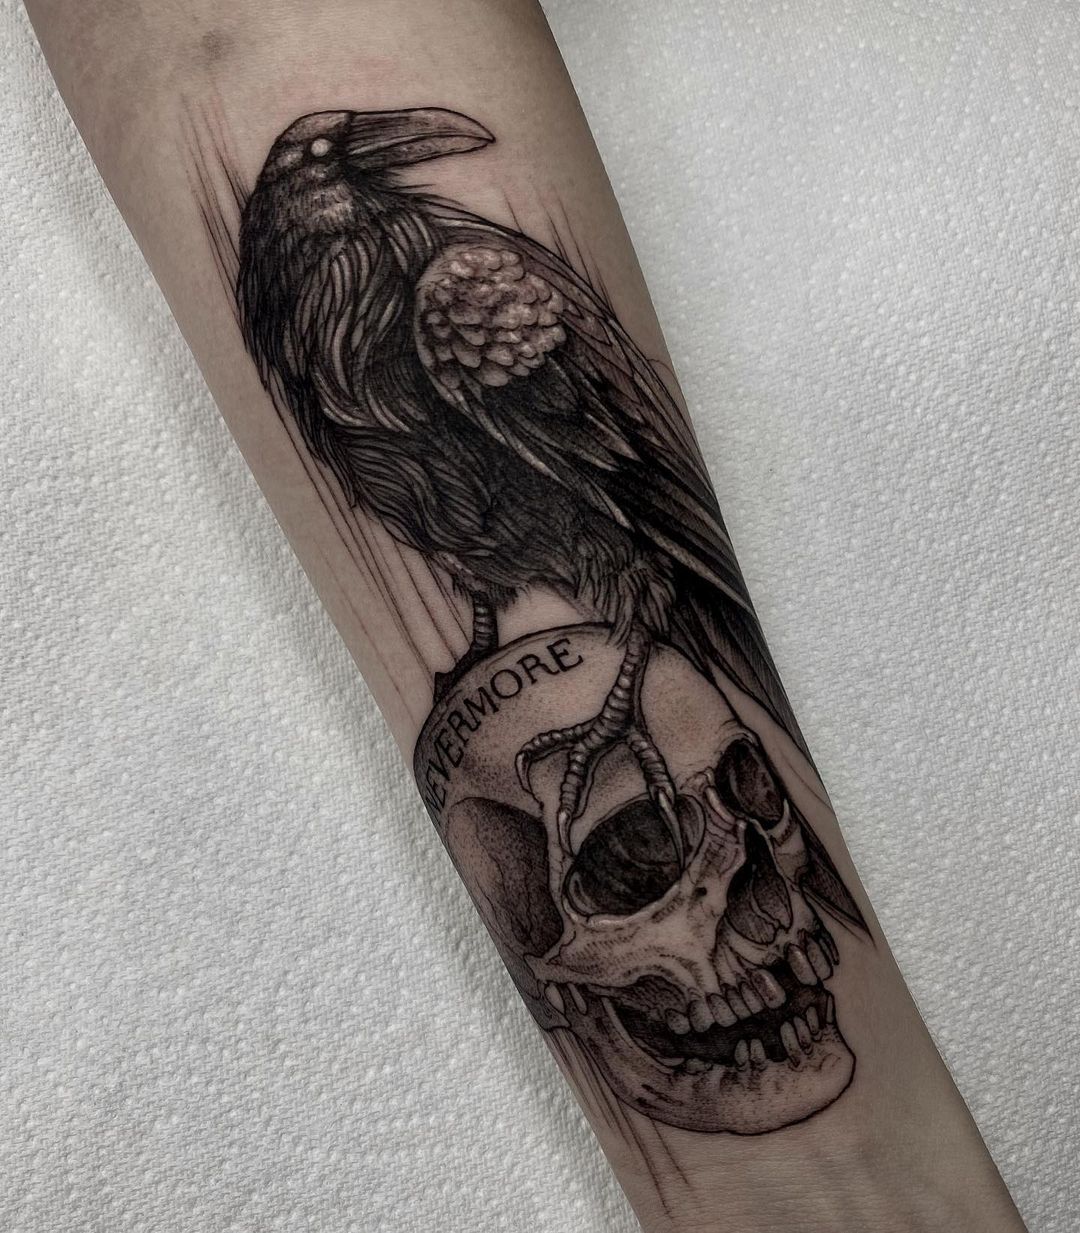 101 Amazing Crow Tattoo Designs You Need To See! | Crow tattoo, Black crow  tattoos, Crow tattoo design